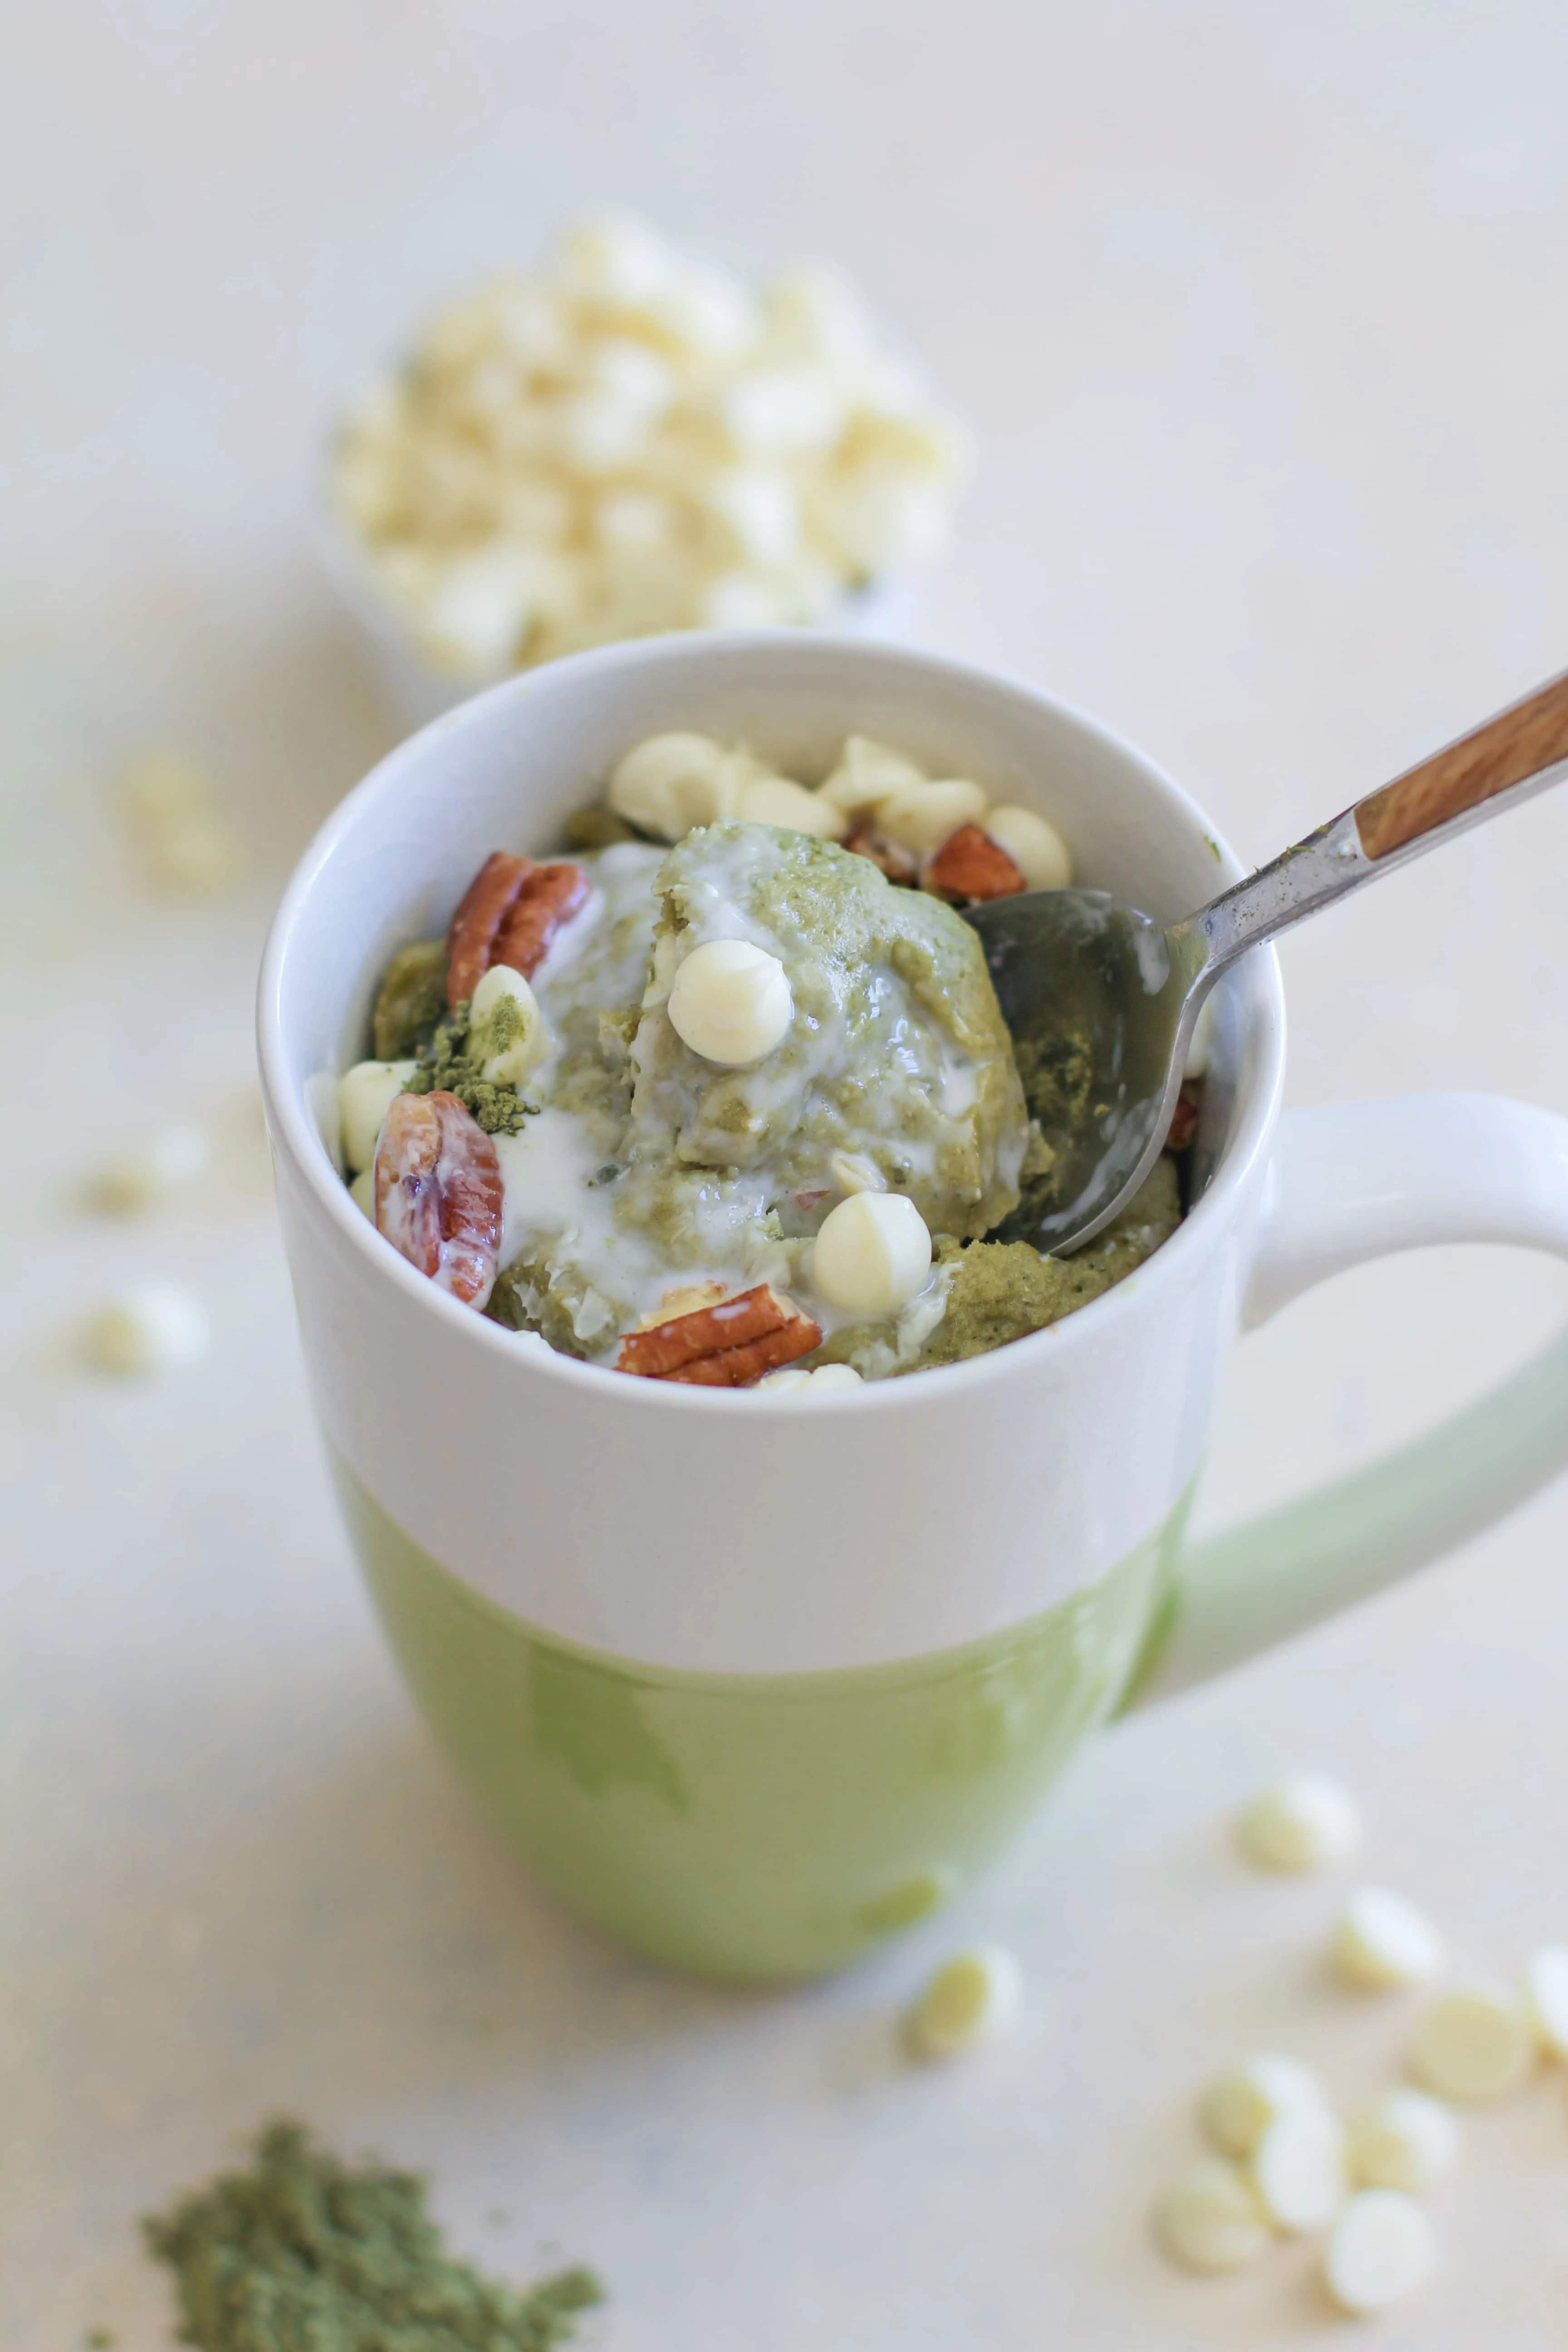 Matcha Mug Cake. Only 5 minutes required for this easy gluten-free dessert recipe